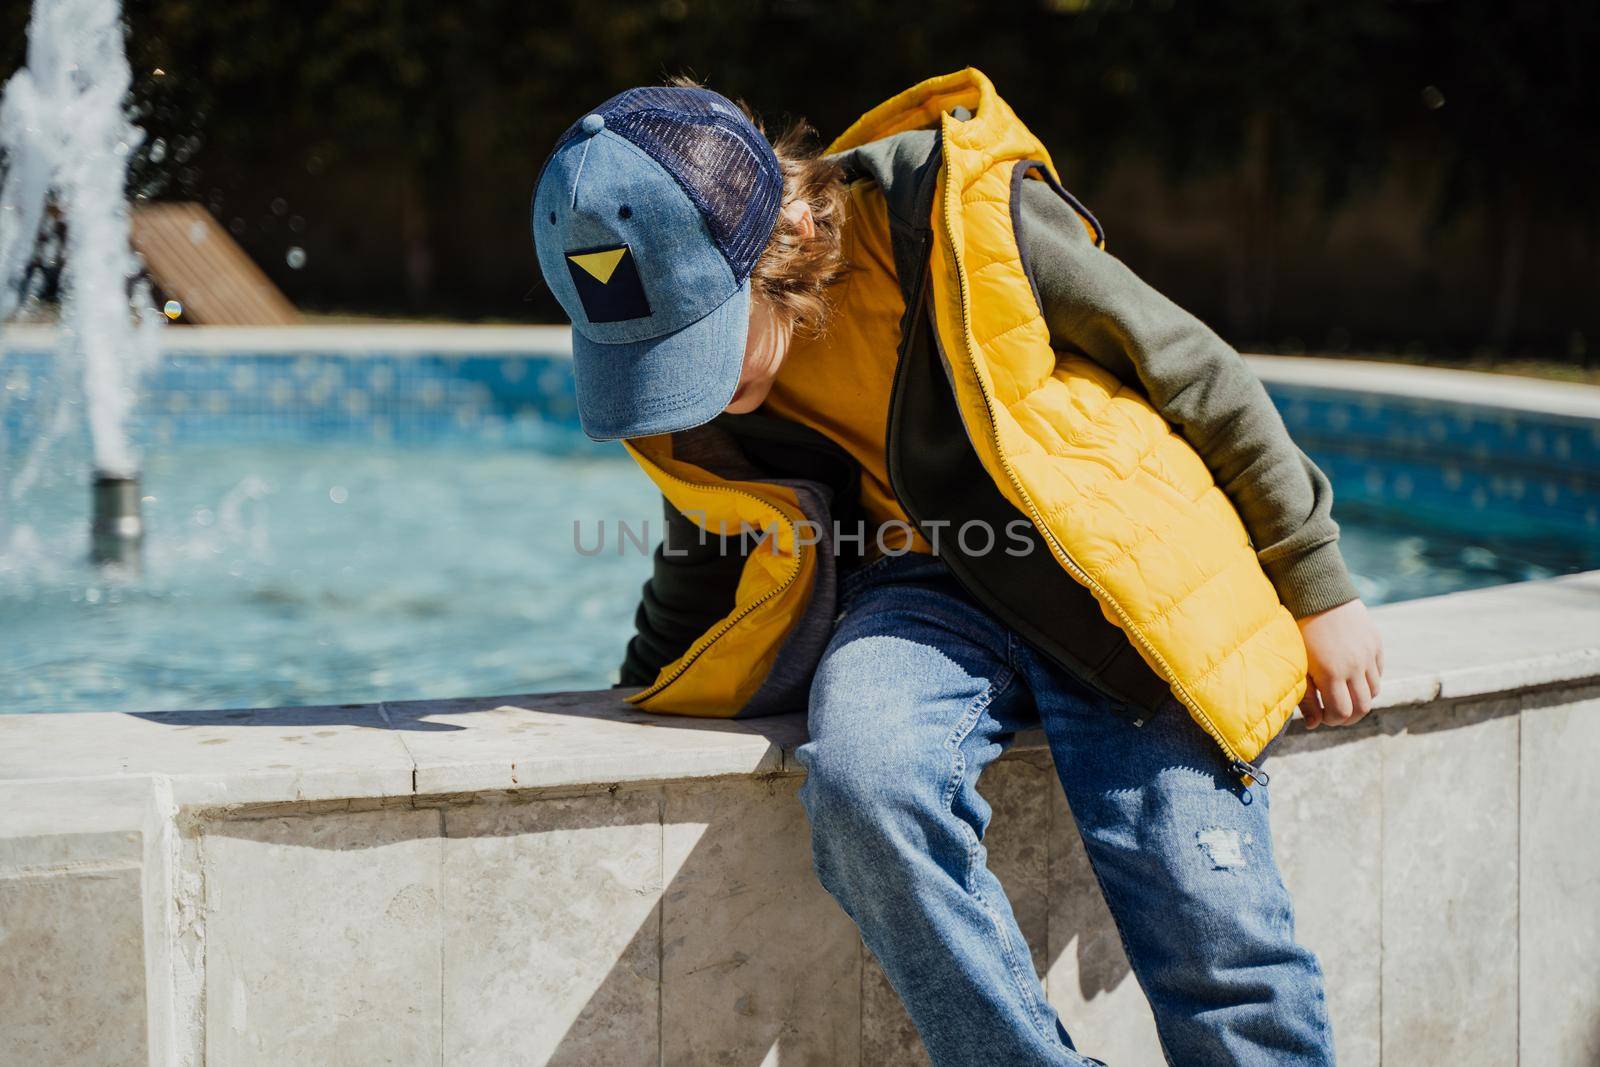 Schoolboy sitting on a fountain in public park during spring sunny day playing with water. Kid in yellow vest chilling in park with water sprinkling in the background. Summer holidays outside.